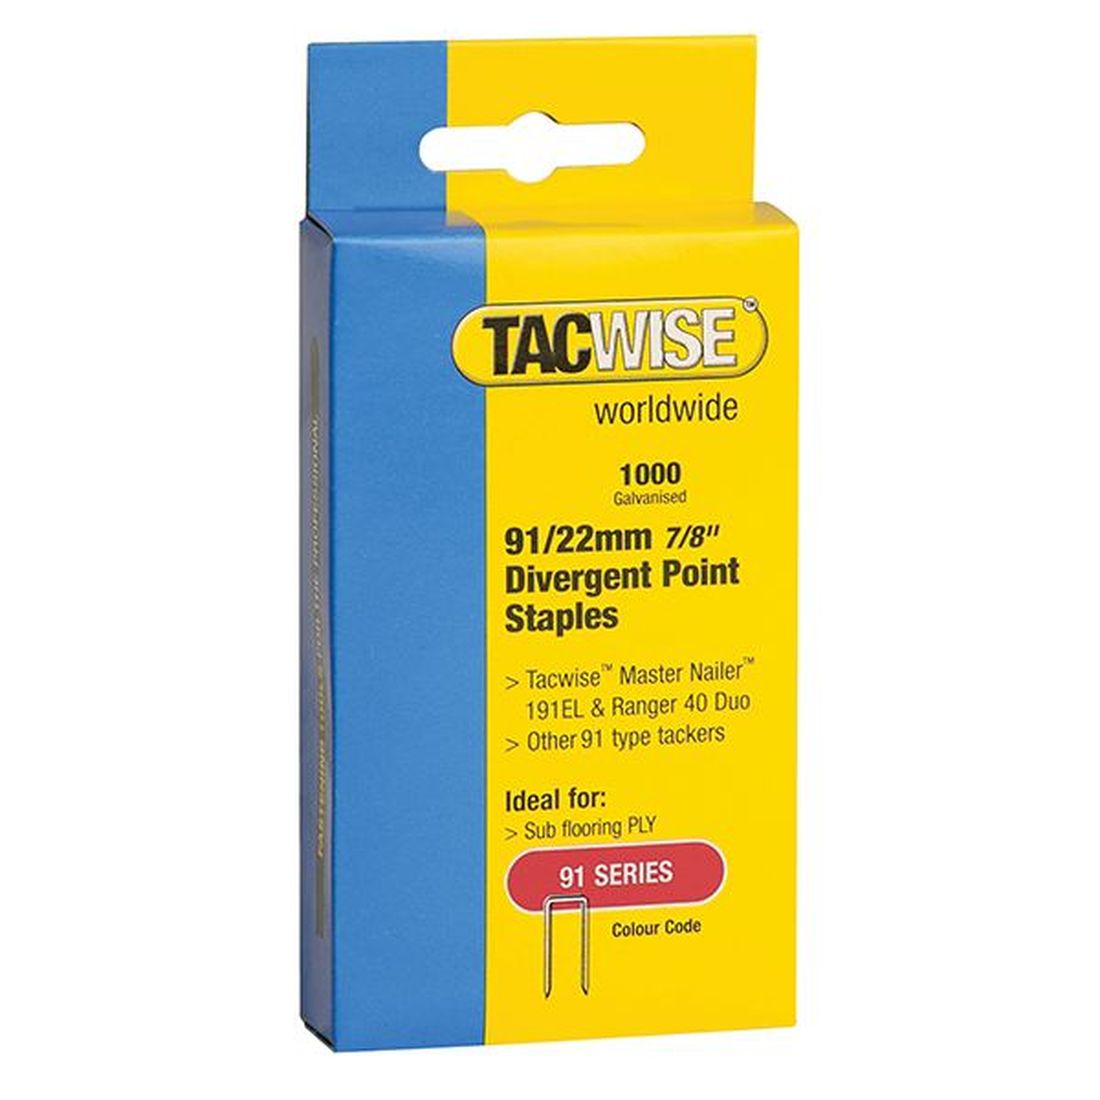 Tacwise 91 Narrow Crown Divergent Point Staples 22mm - Electric Tackers (Pack 1000)     